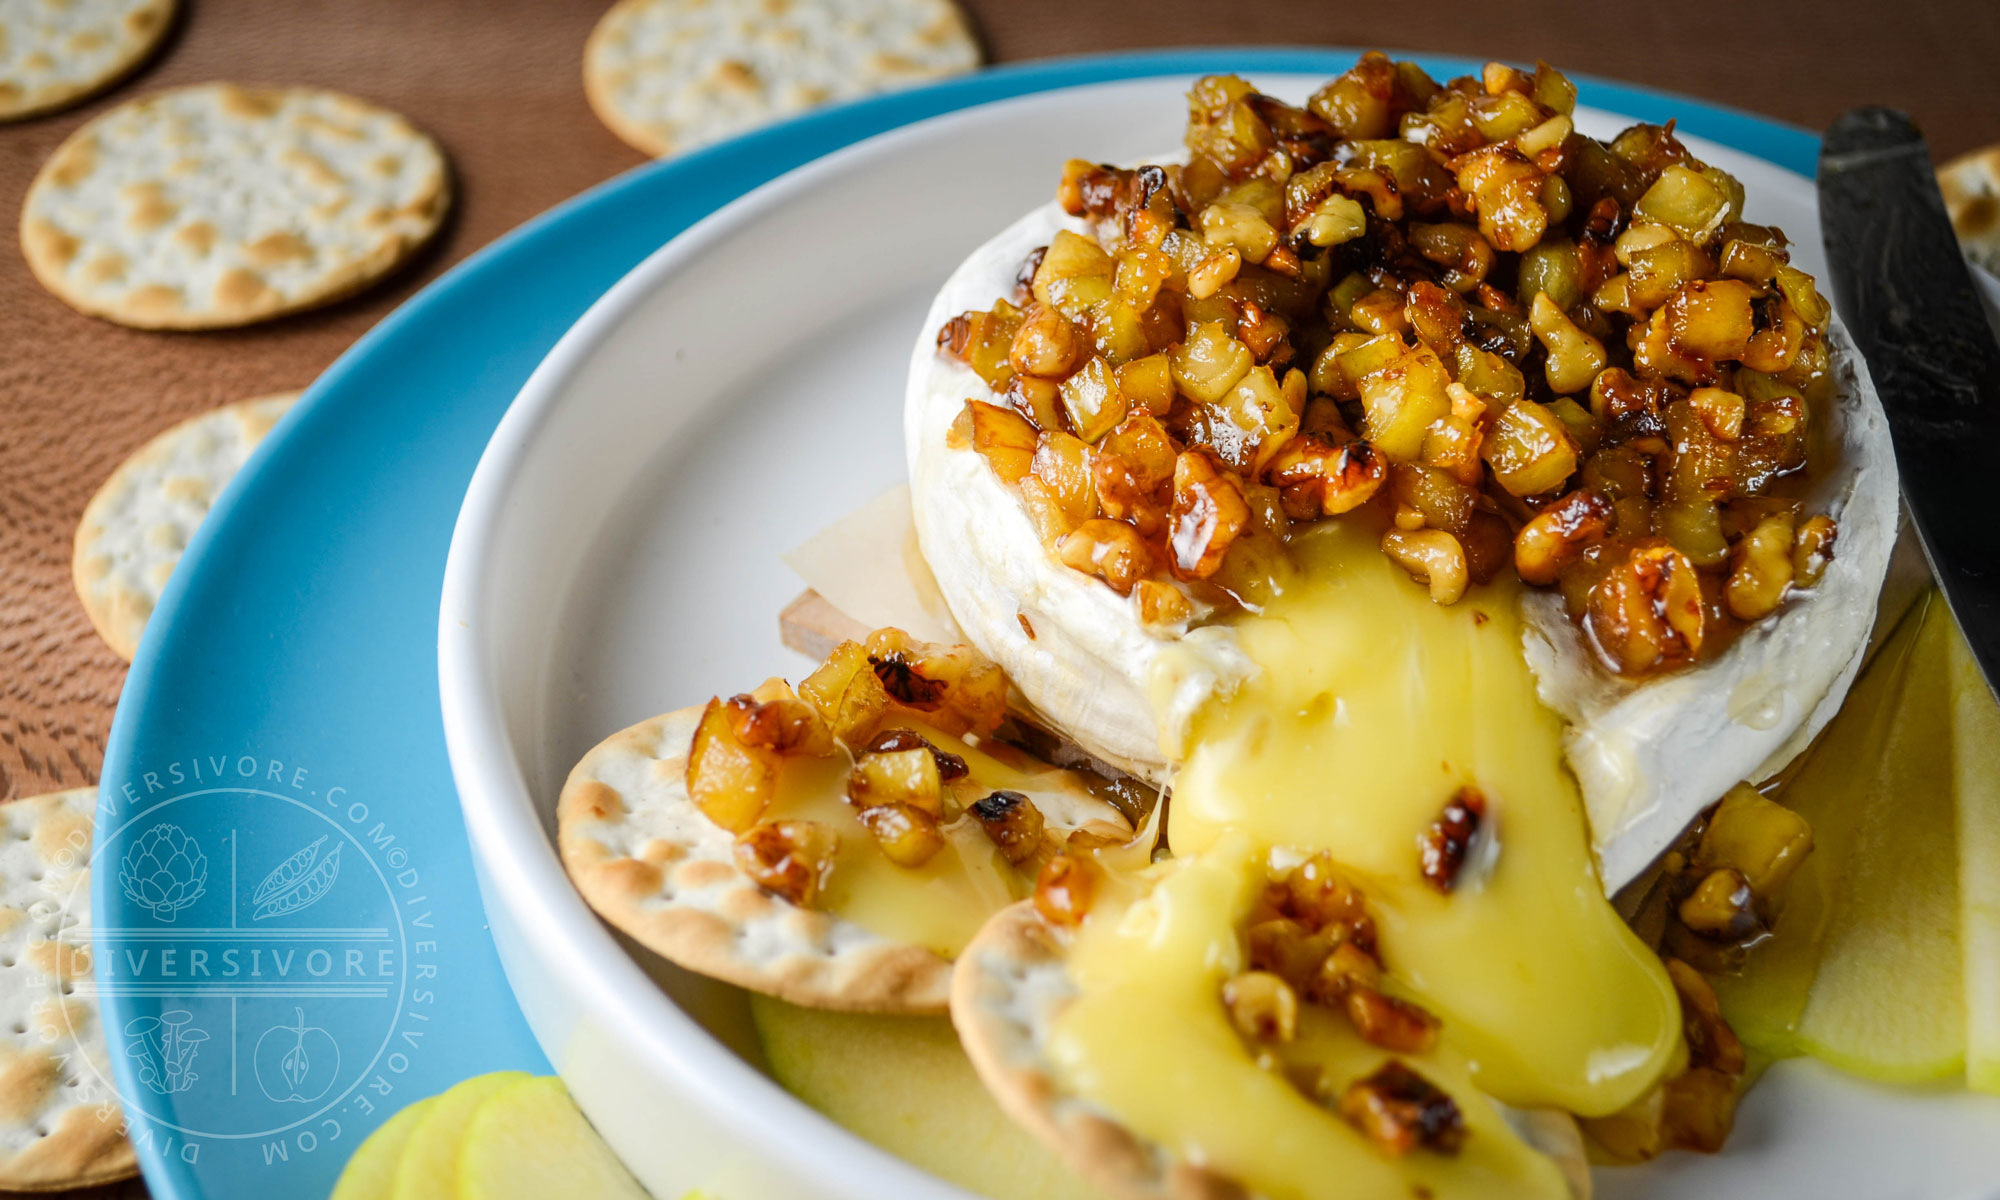 Featured image for “Baked Brie with Apple, Walnut, and Caraway”